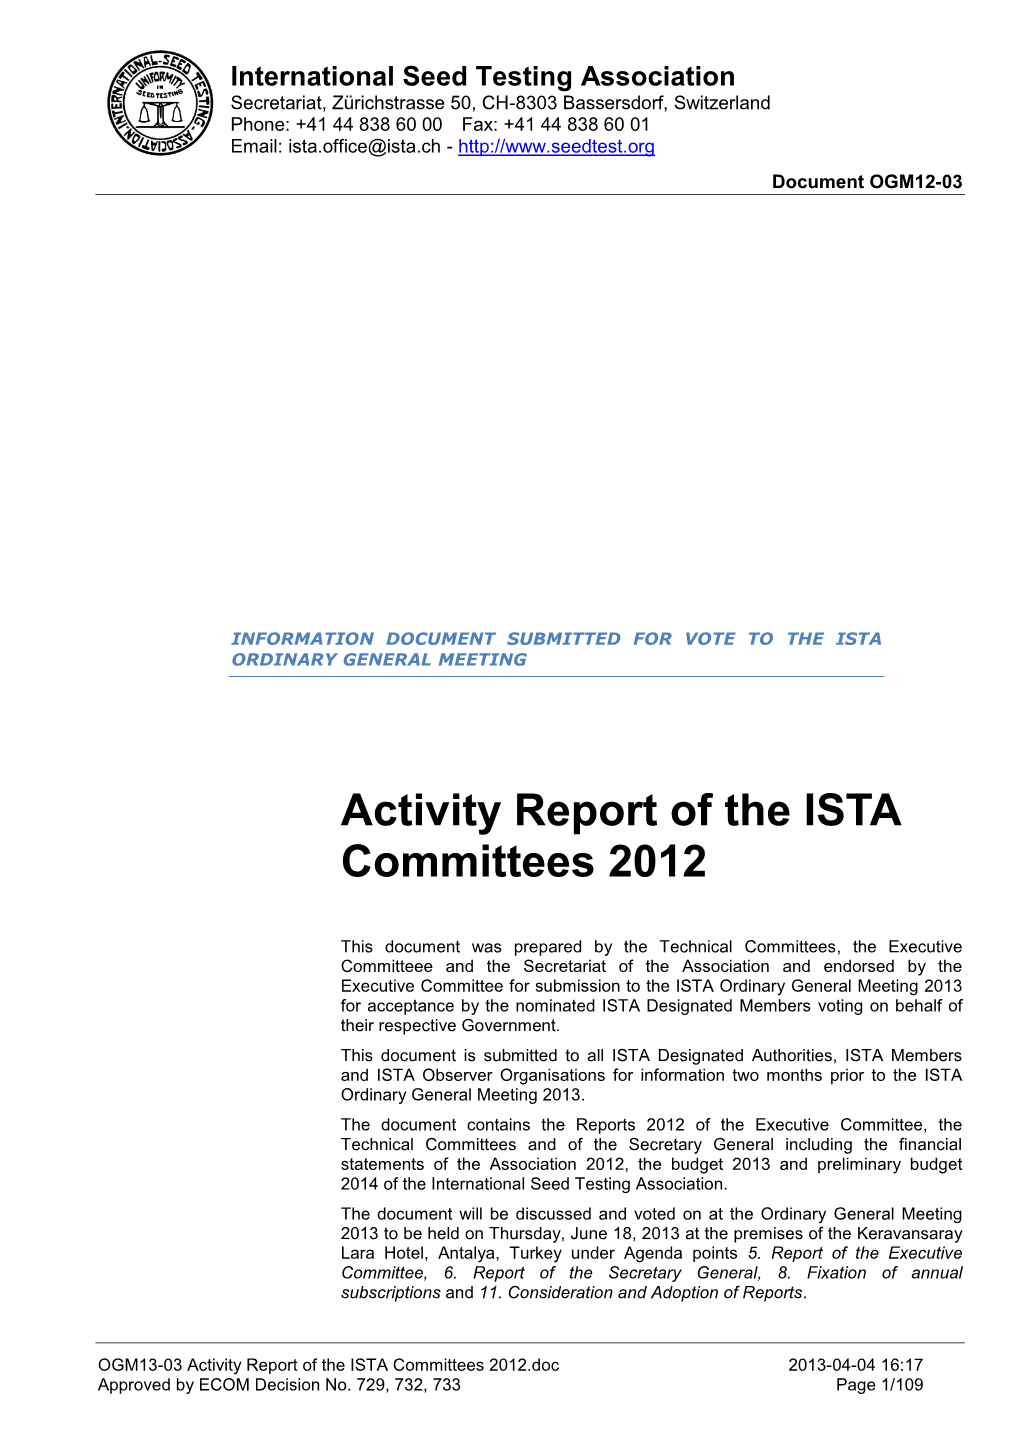 Activity Report of the ISTA Committees 2012